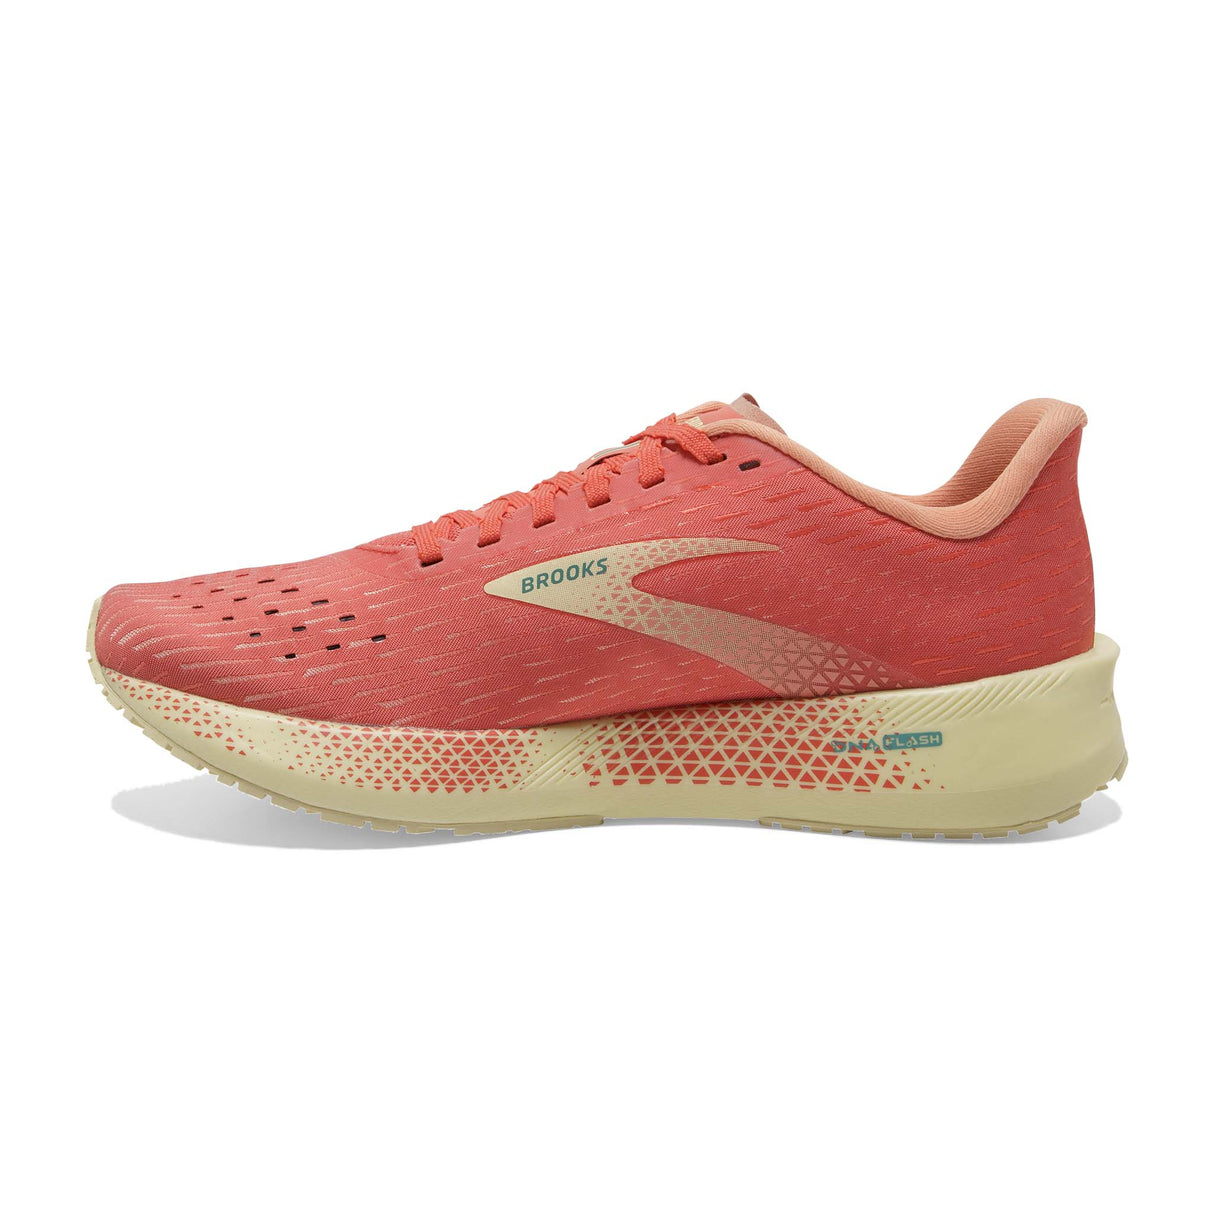 Brooks Hyperion Tempo souliers de course femme hot coral flan fusion coral lateral